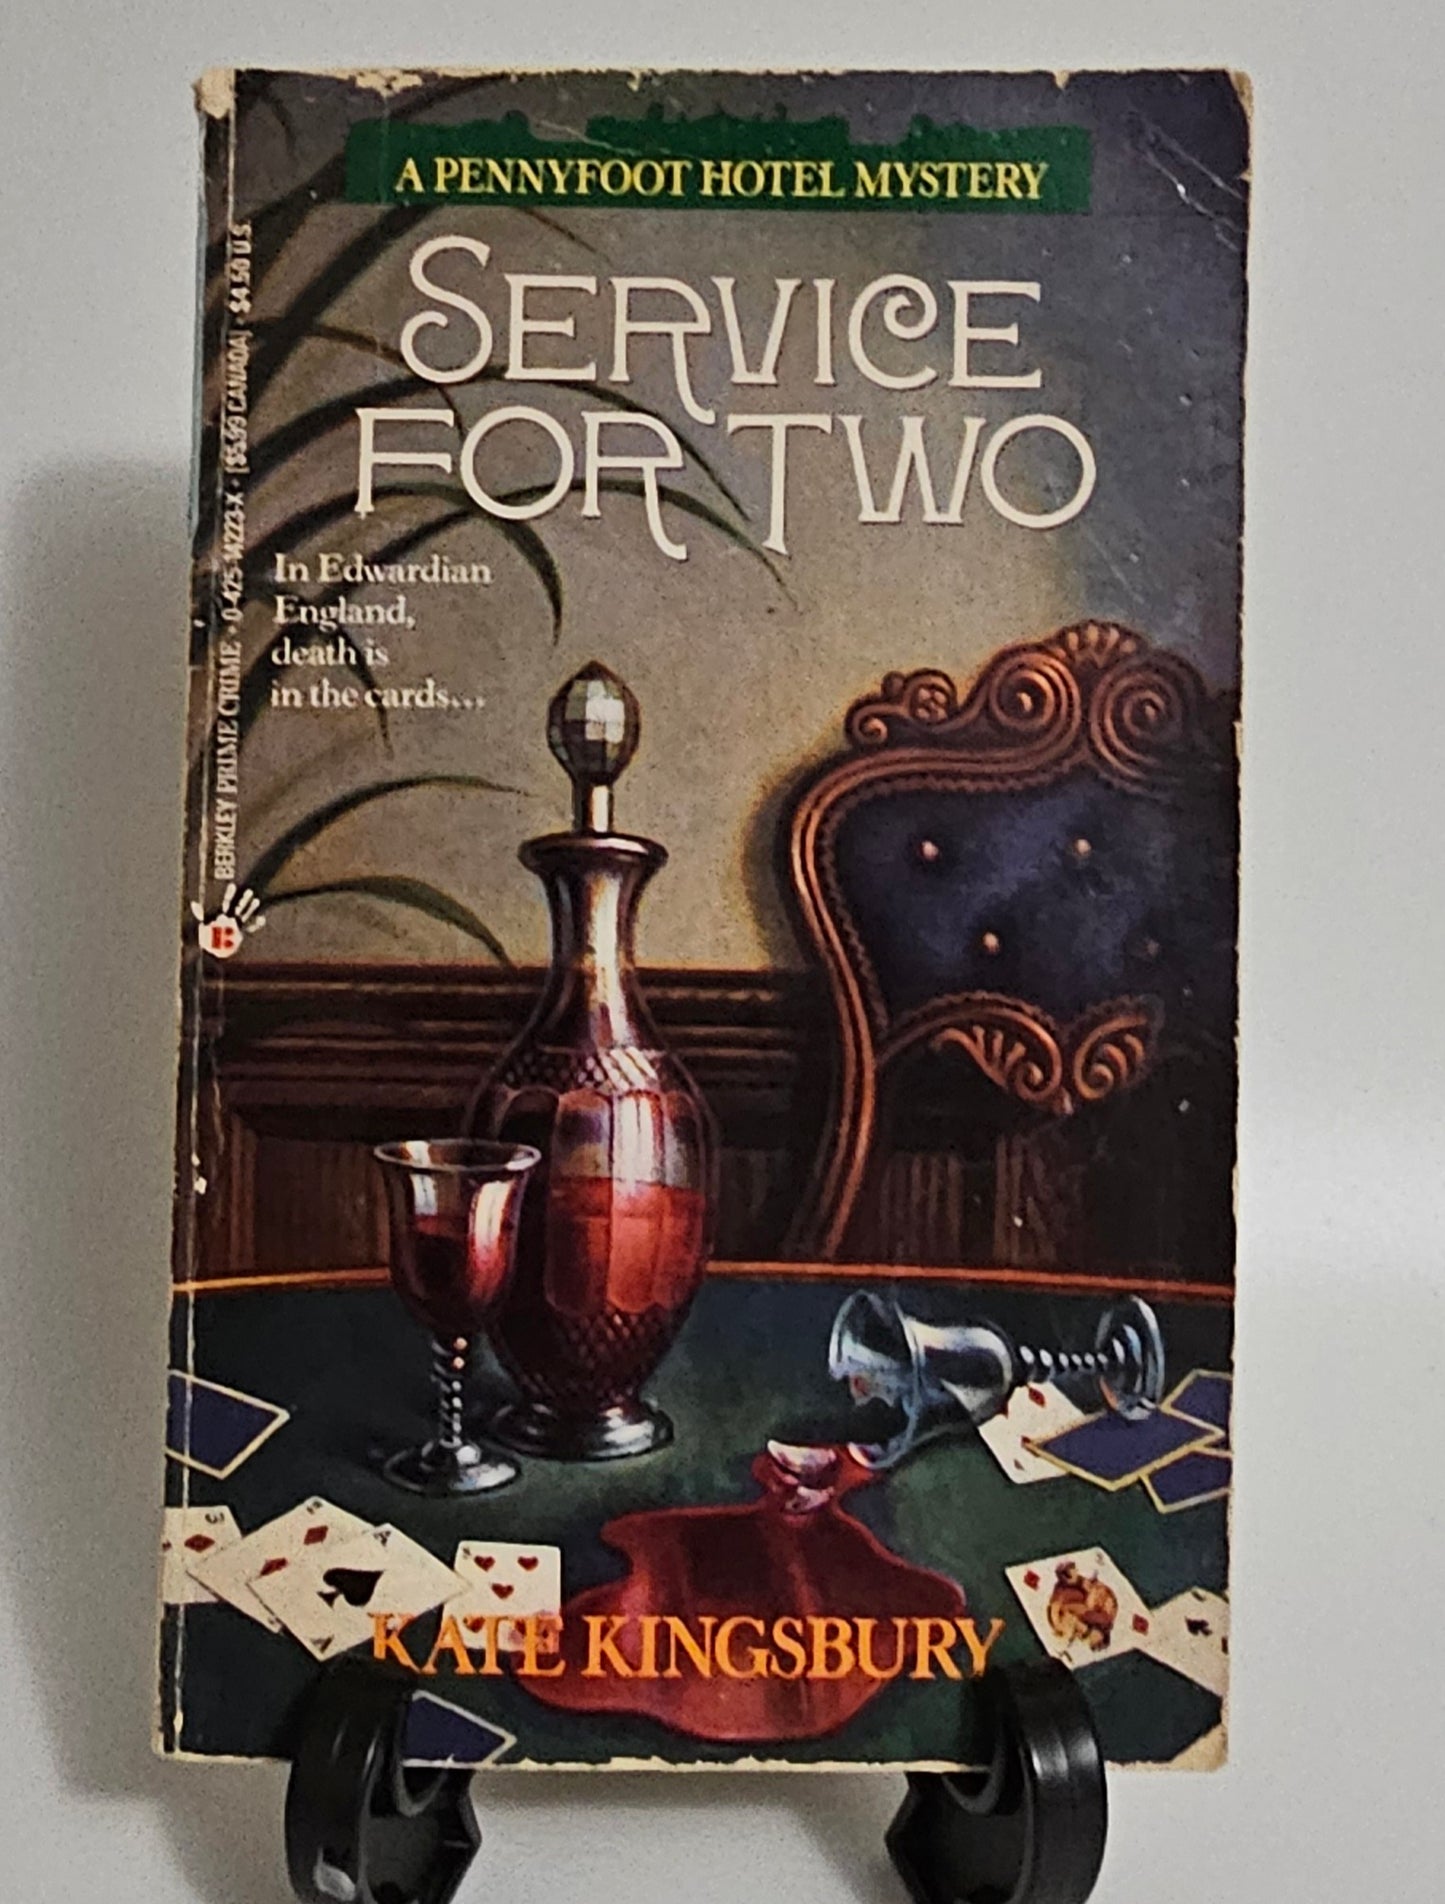 Service for Two by Kate Kingsbury (Pennyfoot Hotel #3)